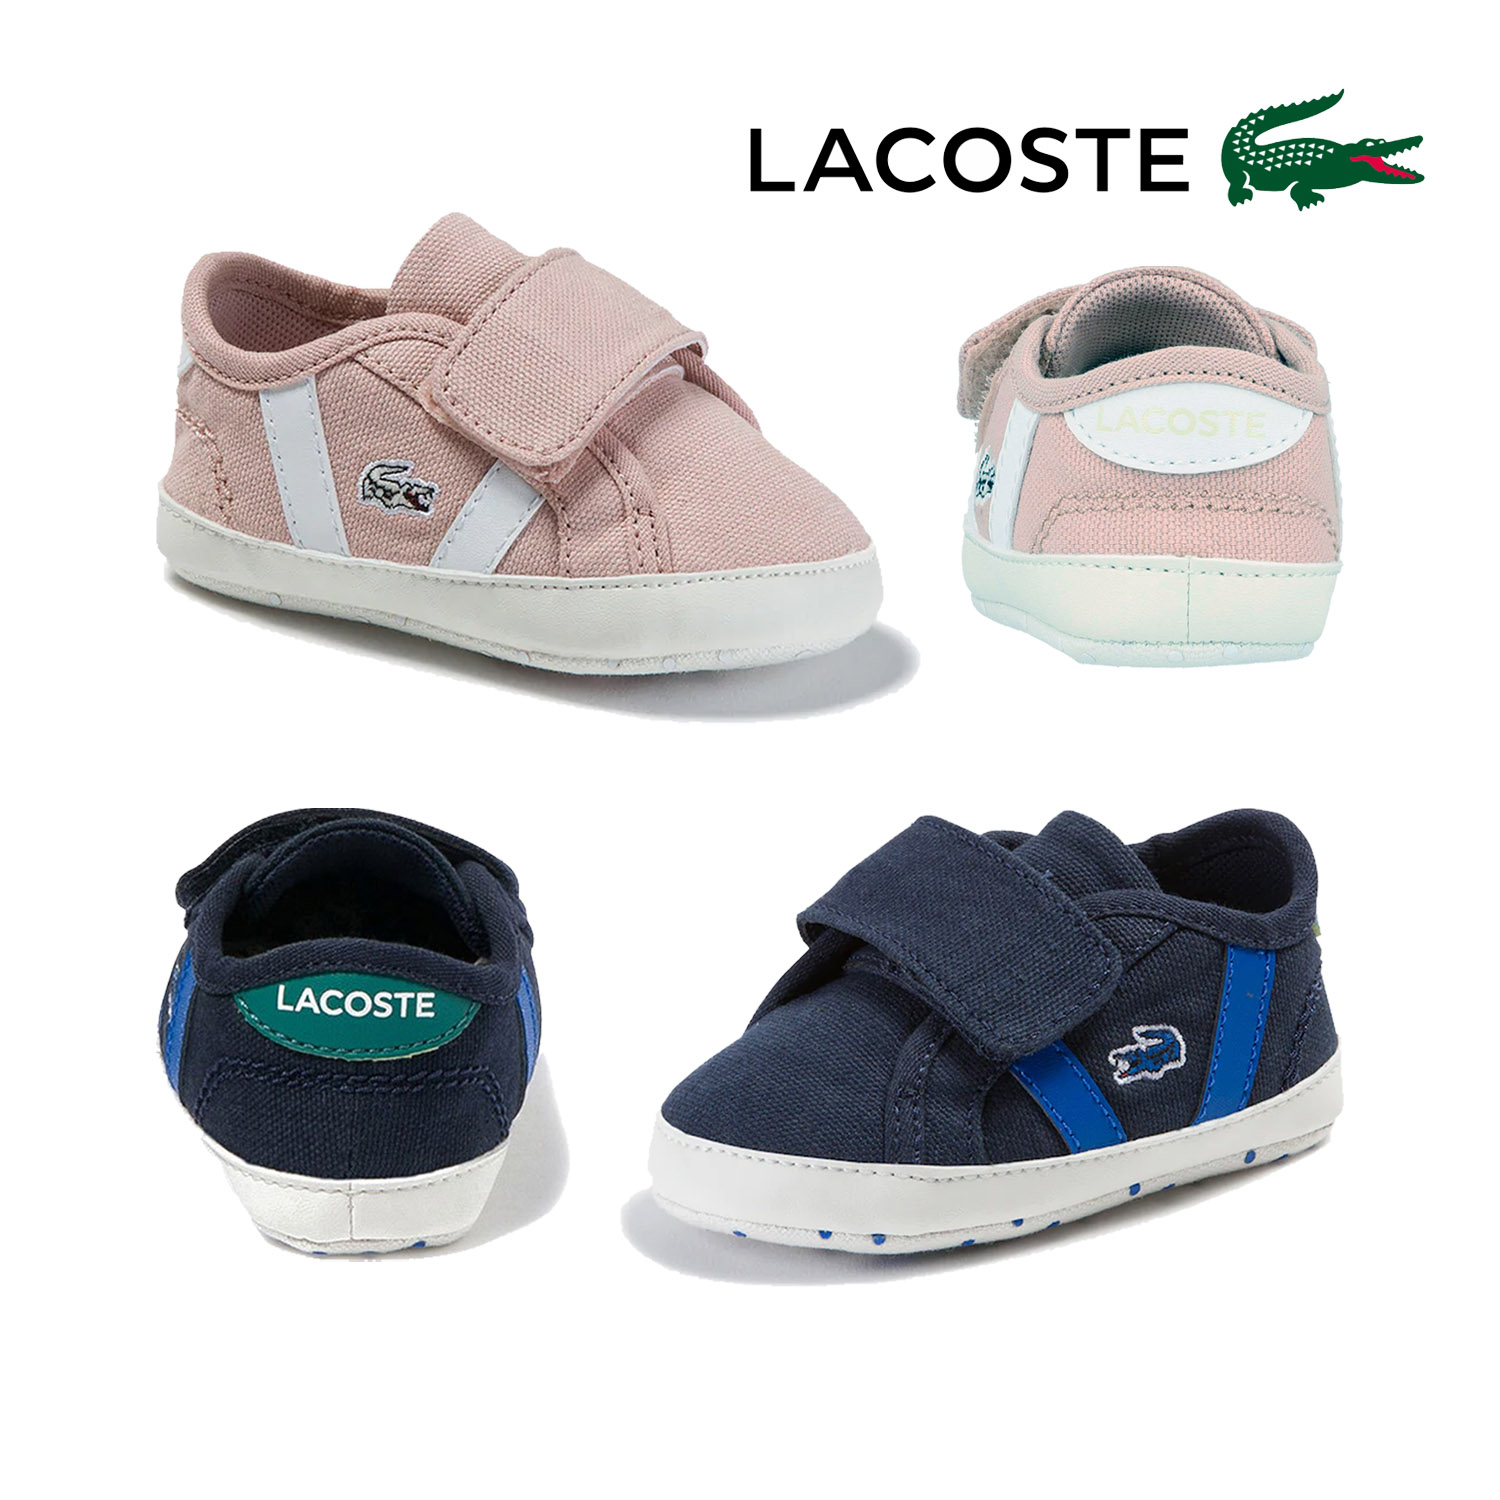 my first lacoste